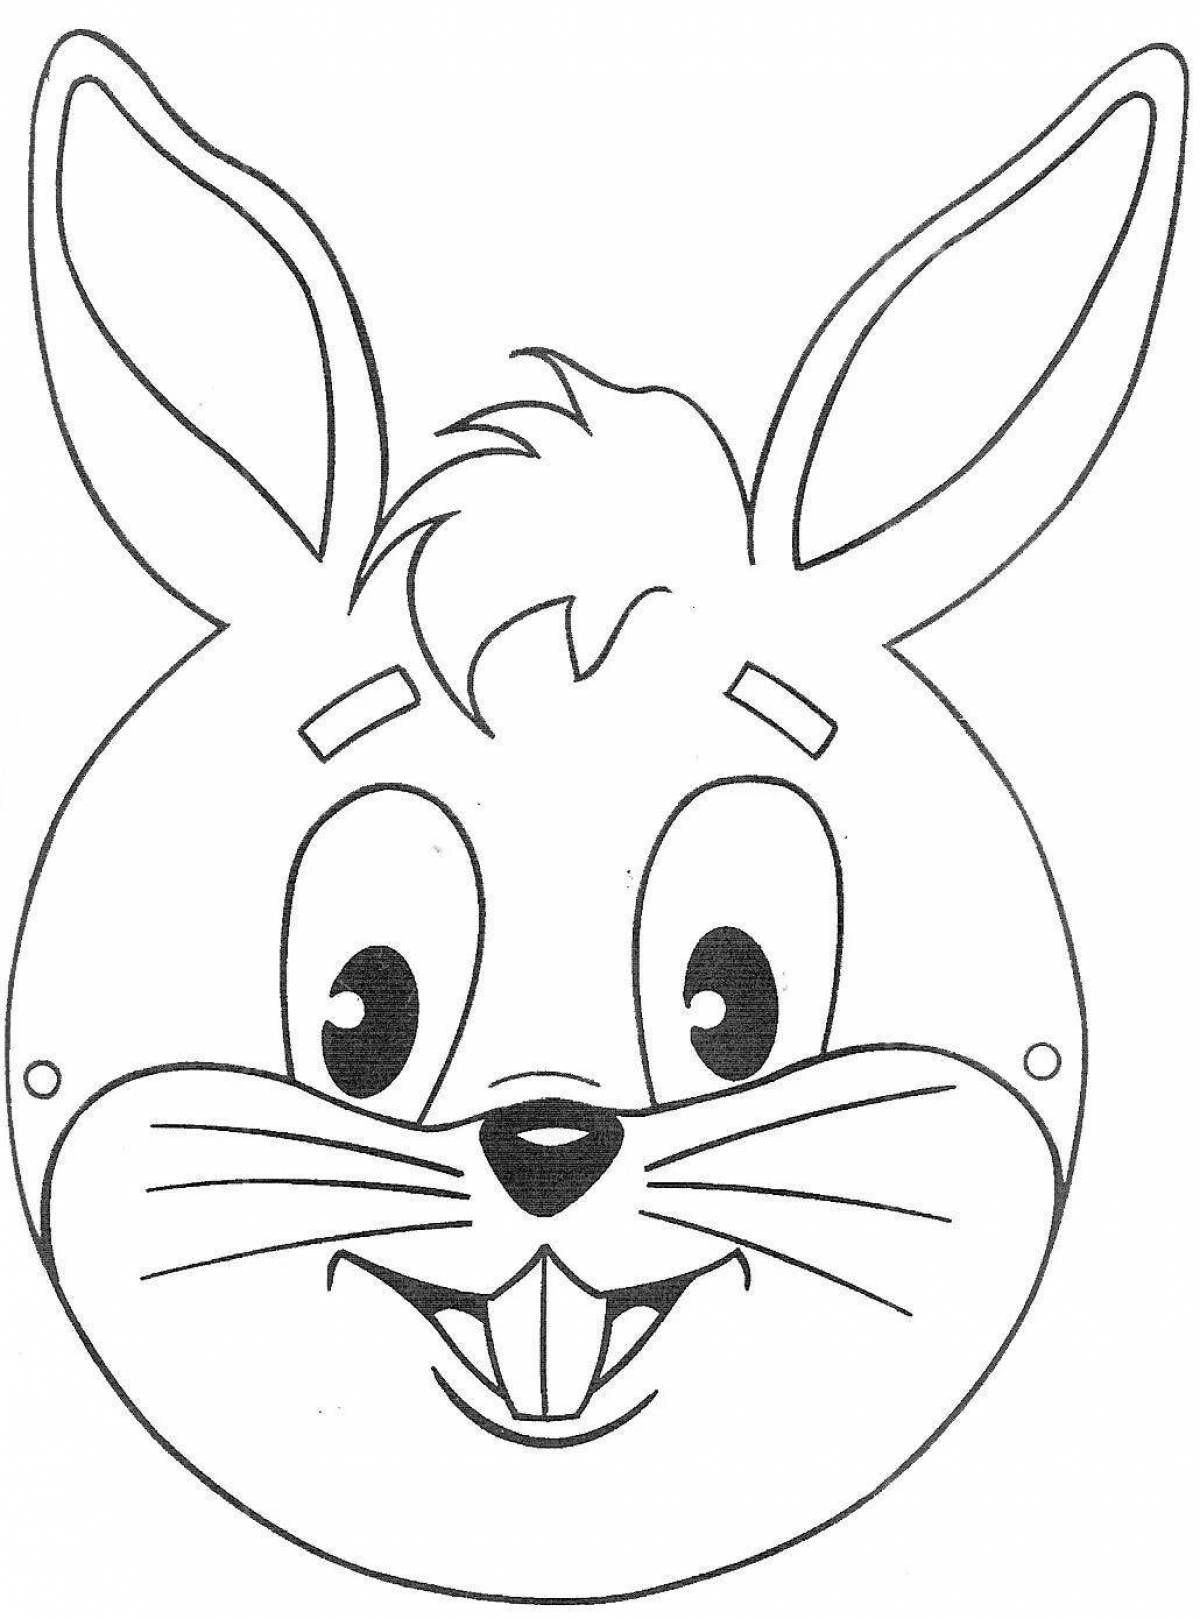 Majestic hare head coloring page